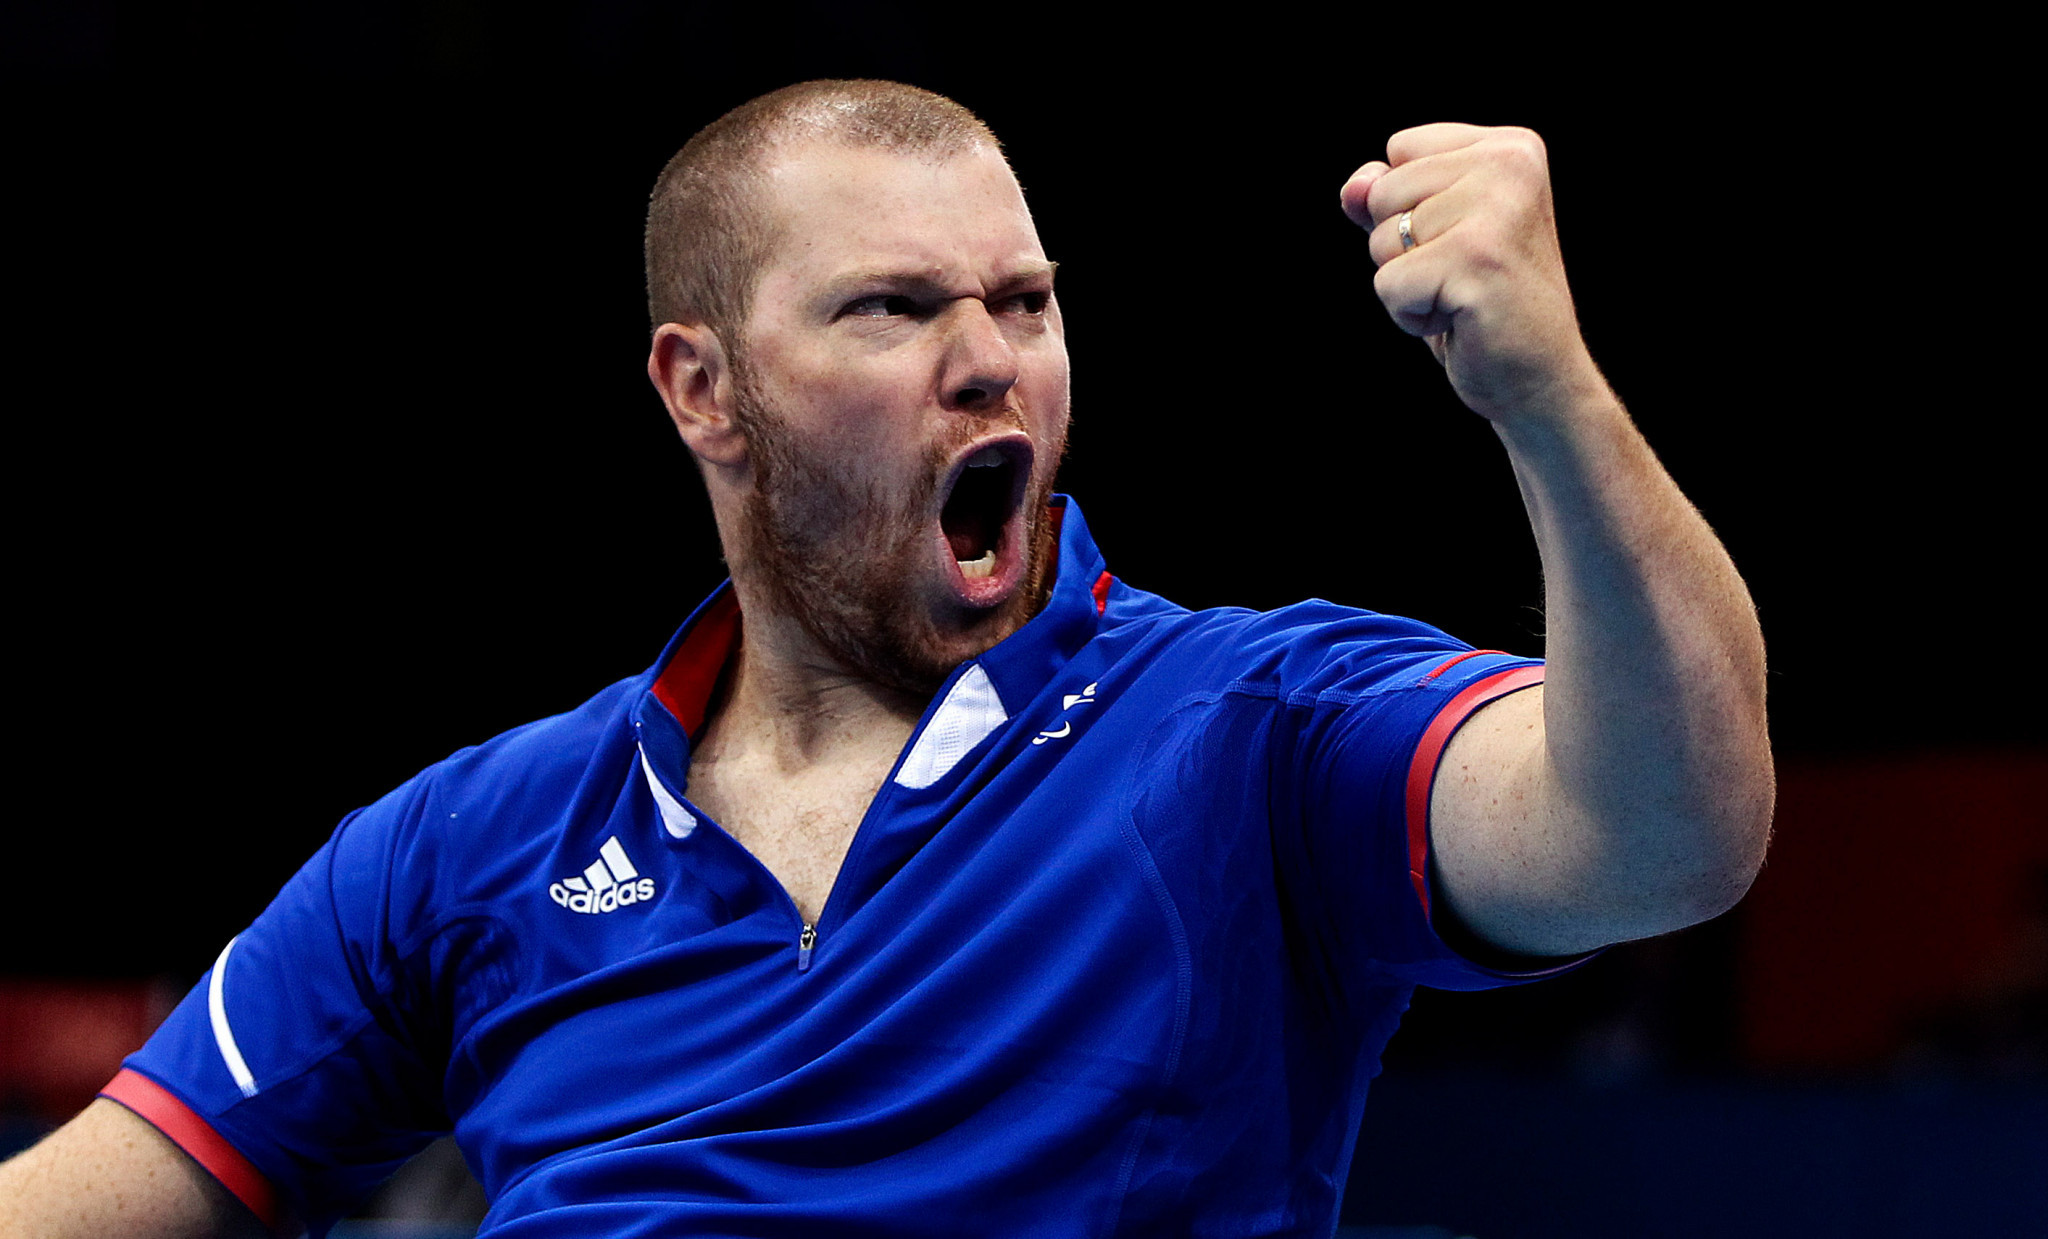 Fabien Lamirault took gold at the ITTF Para European Championships in Sweden ©Getty Images